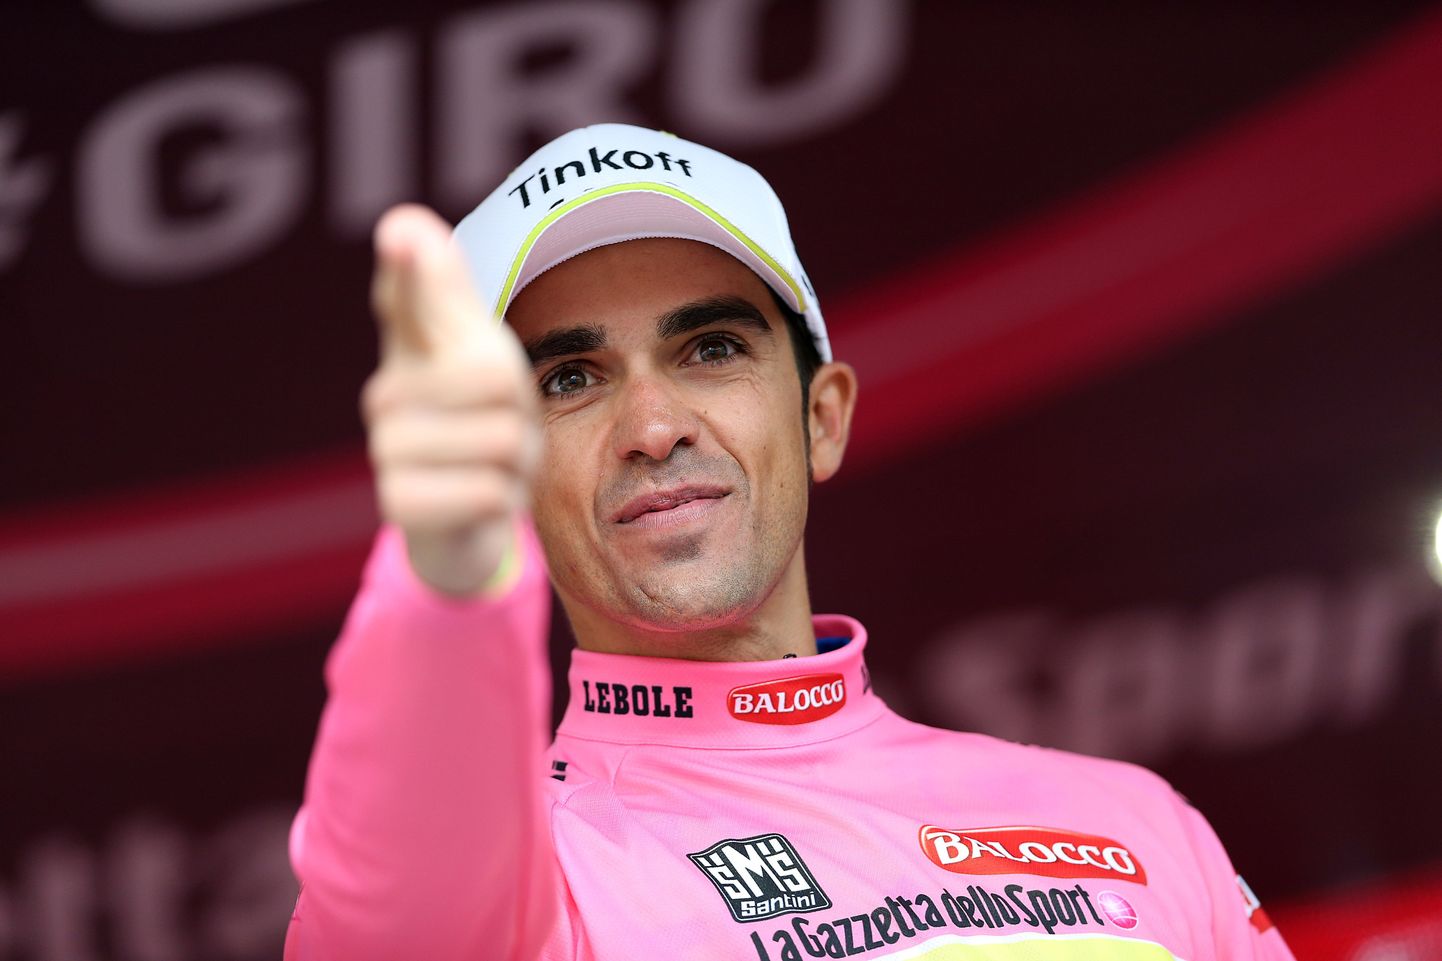 Spanish Alberto Contador (Tinkoff Saxo) celebrates the pink jersey of overall leader on the podium of the 14th stage of the 98th Giro d'Italia, Tour of Italy, a 60km Individual Time Trial between Treviso and Valdobbiadene on May 23, 2015 in Valdobbiadene. Spaniard Alberto Contador bounced back from a crash on Friday to retake the overall lead in the Giro d'Italia after Saturday's 14th stage. The 32-year-old, who won the Italian race in 2008, finished third on the day but picked up three minutes on overnight leader Fabio Aru during the 59.4km time-trial which was won by Sky's Belarus rider Vasil Kiryienka.  AFP PHOTO / LUK BENIES